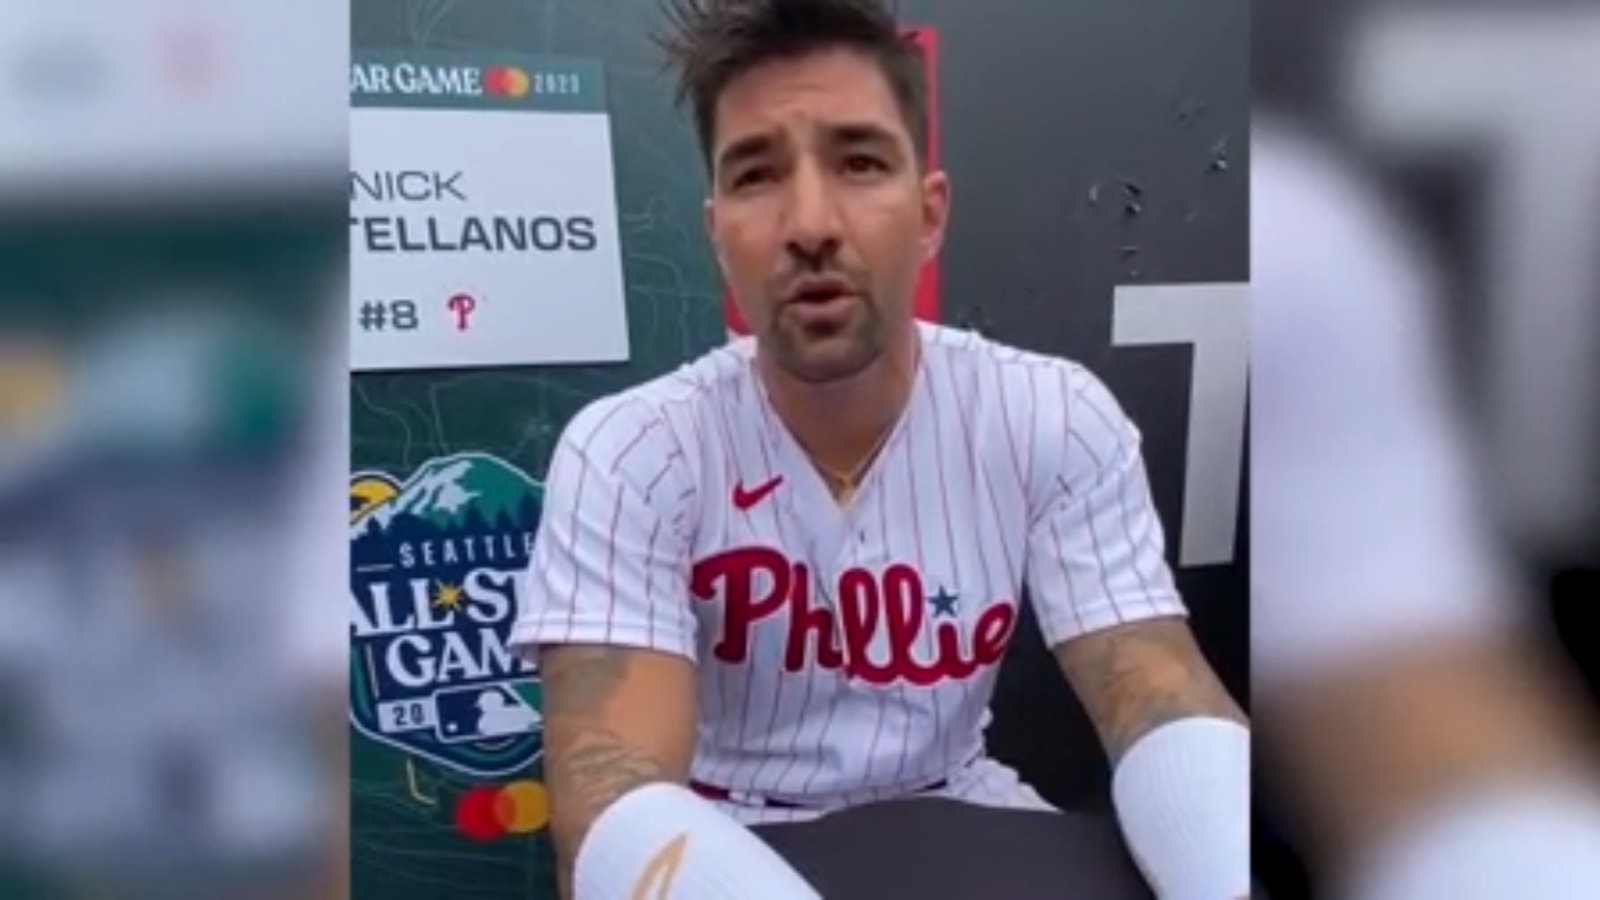 Matt Olson and Nick Castellanos discuss the original expectations of Shohei Ohtani as a two-way player